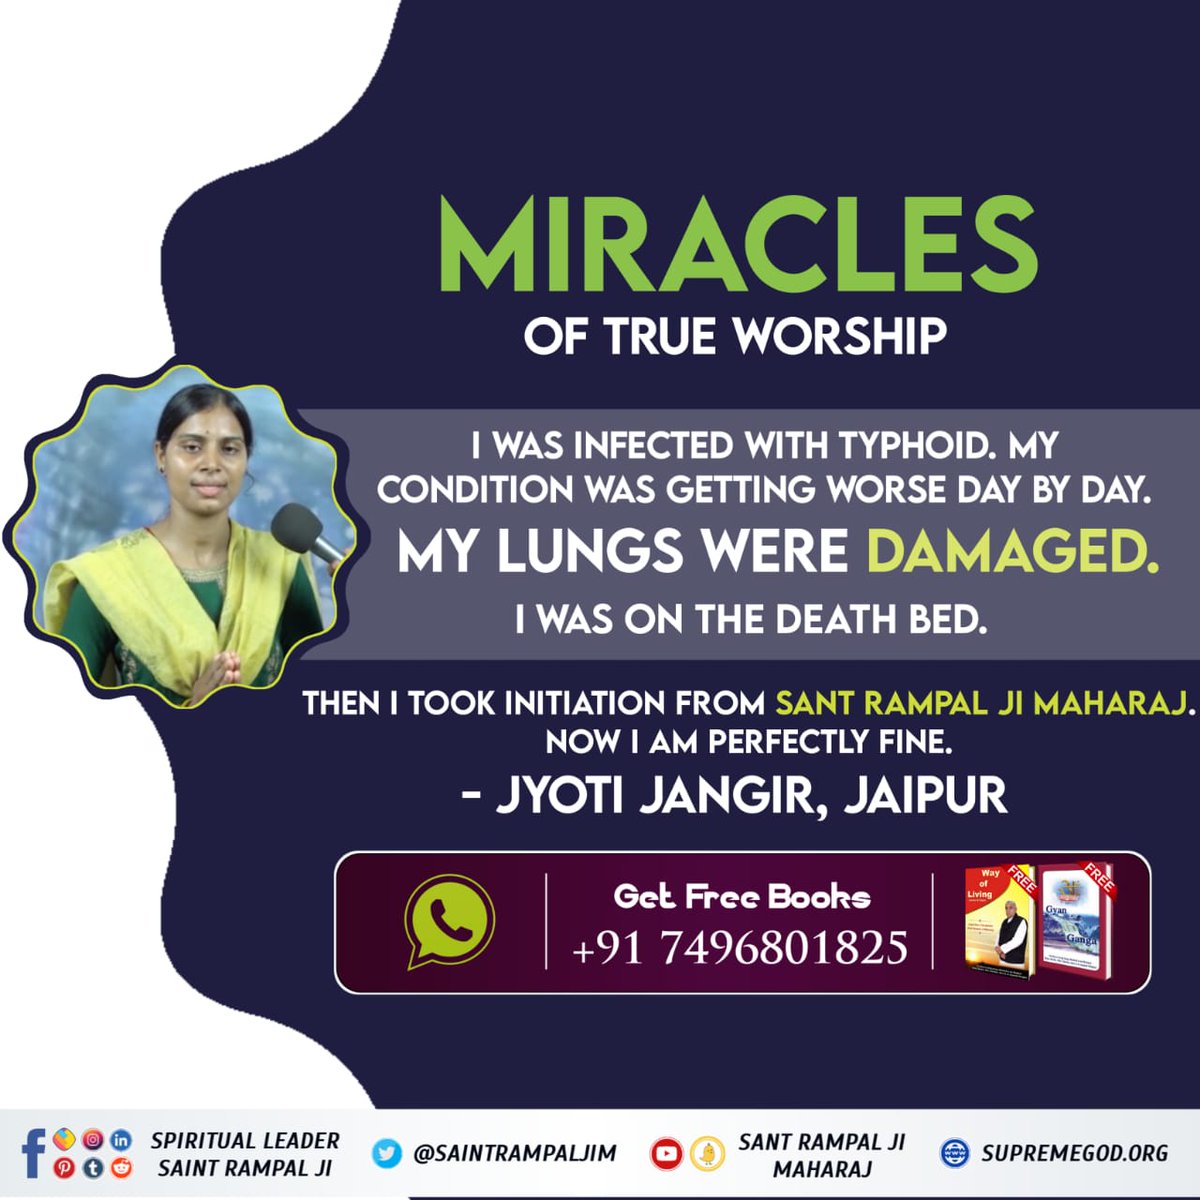 #ऐसे_सुख_देता_है_भगवान
I Was Infected with Typhoid. My Condition Was Getting Worse Day By Day. My Lungs Were Damaged.
I Was On Death Bed.
Then I Took Initiation From Sant Rampal Ji Maharaj. Now I Am Perfectly Fine.
- Jyoti Jangir, Jaipur 
Kabir Is God